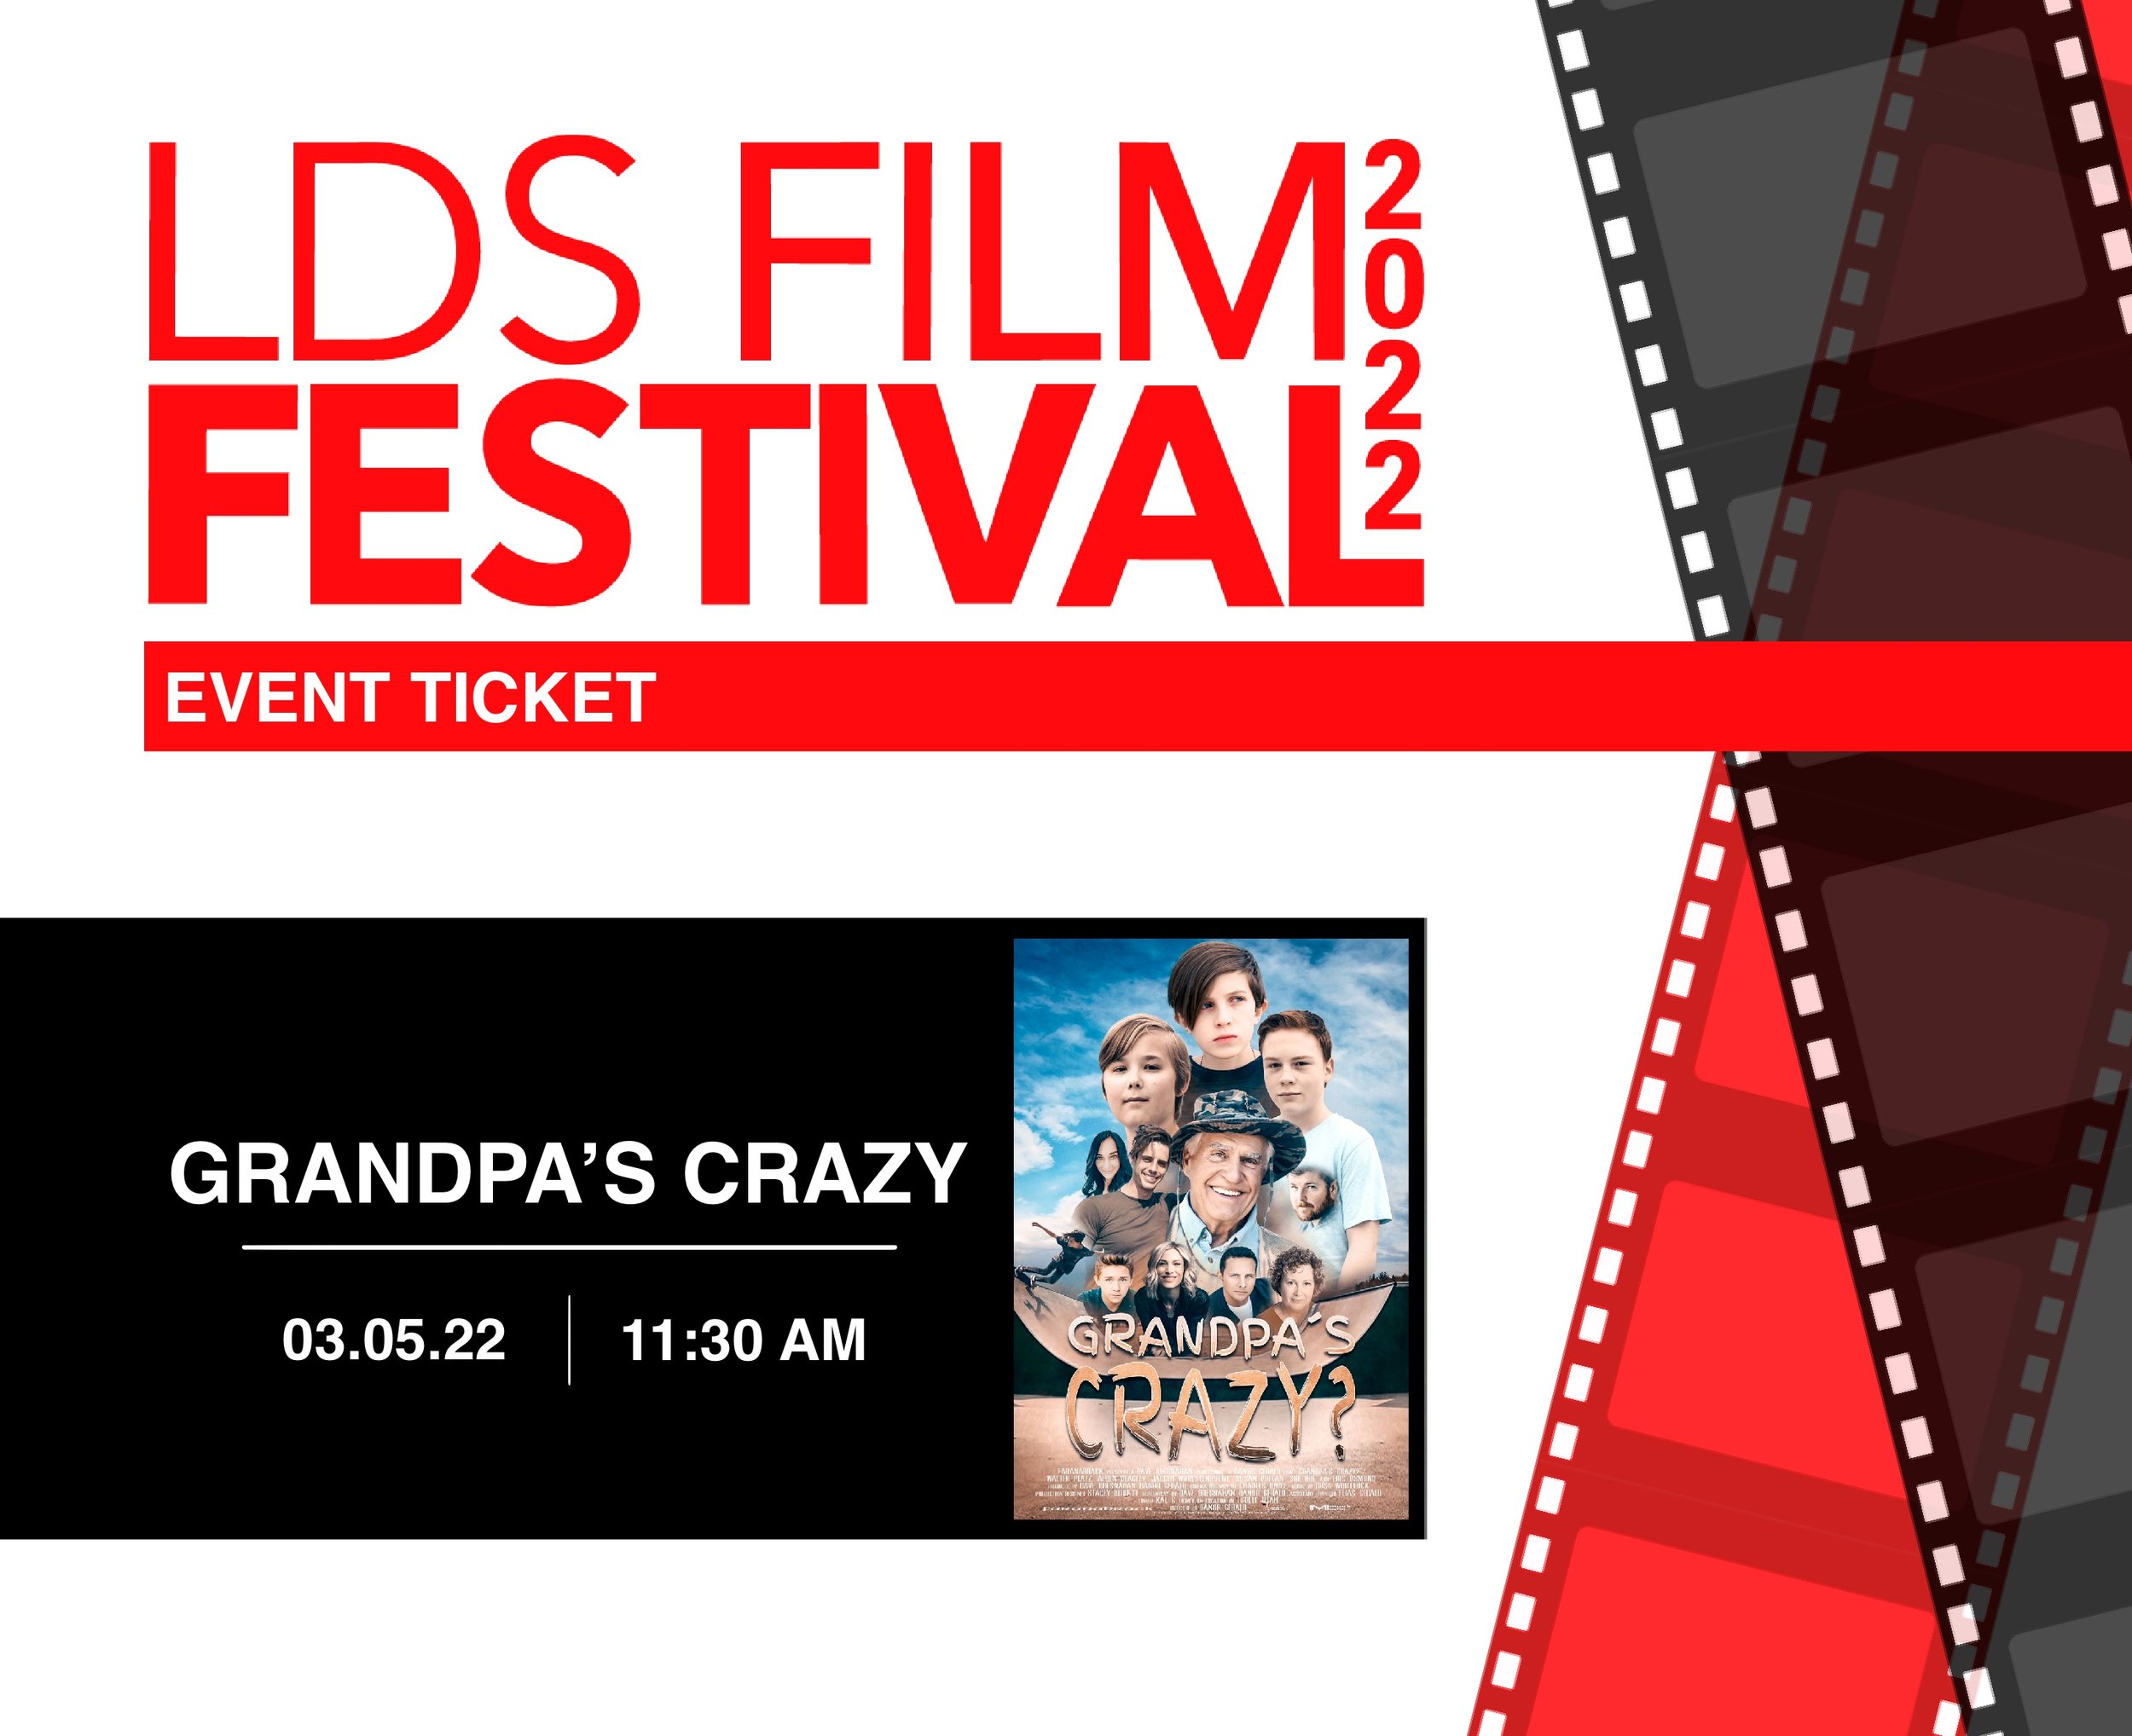 Grandpa’s Crazy03.05.22 | 11:30 AM Showhouse II Theatre - Gramps pretended to get lost to get some love and attention from his family - it backfired, big time.Q&A with filmmakers